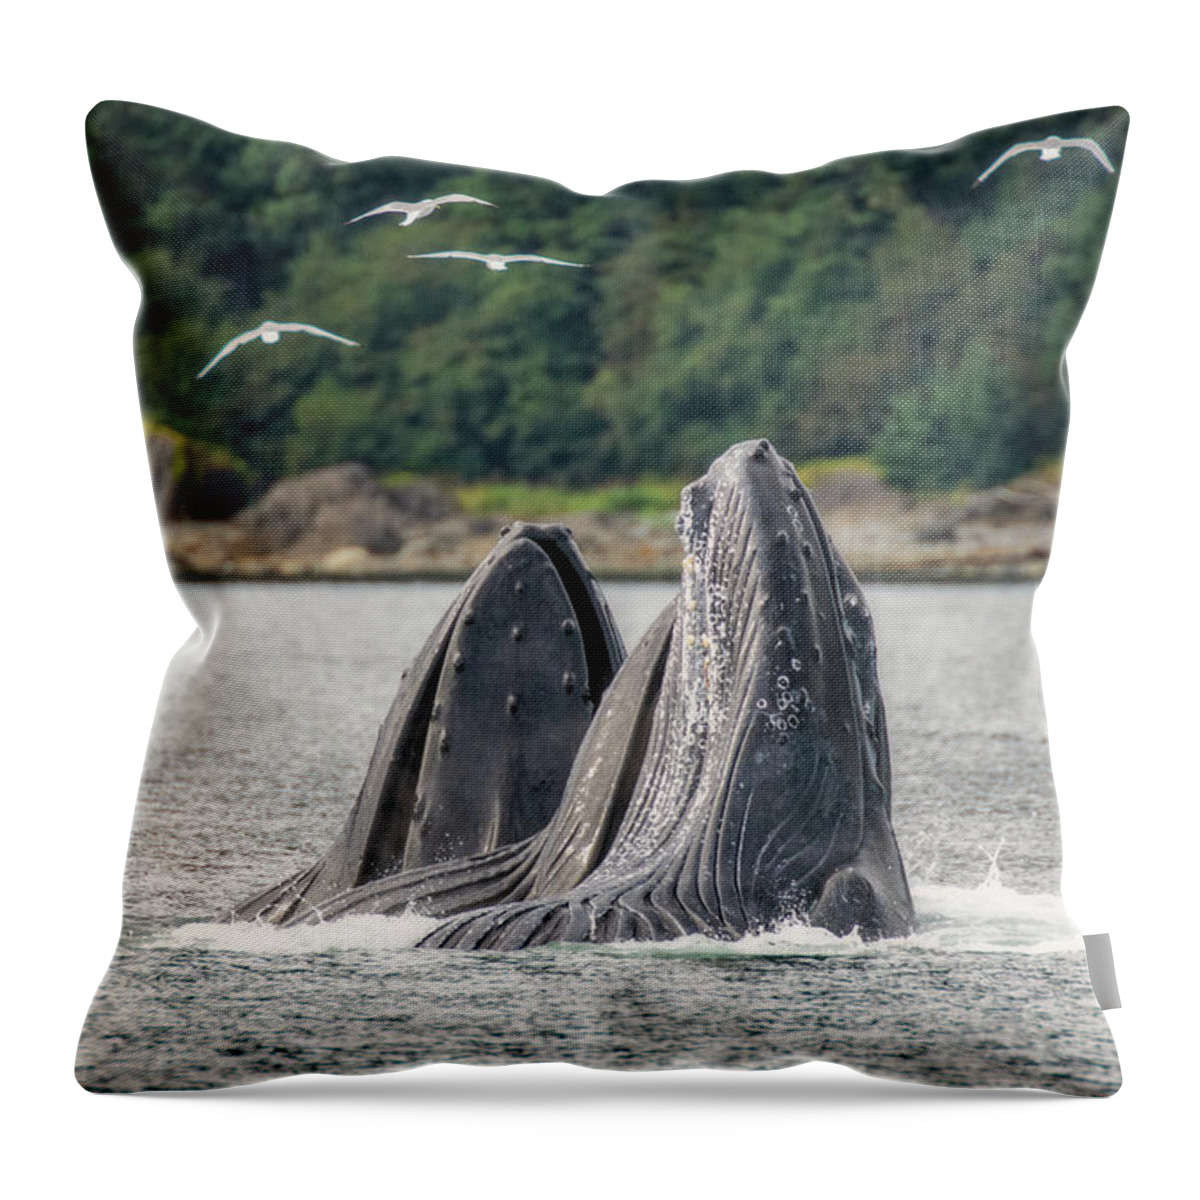 Brown Throw Pillow featuring the photograph Breaching Whales by Robert J Wagner